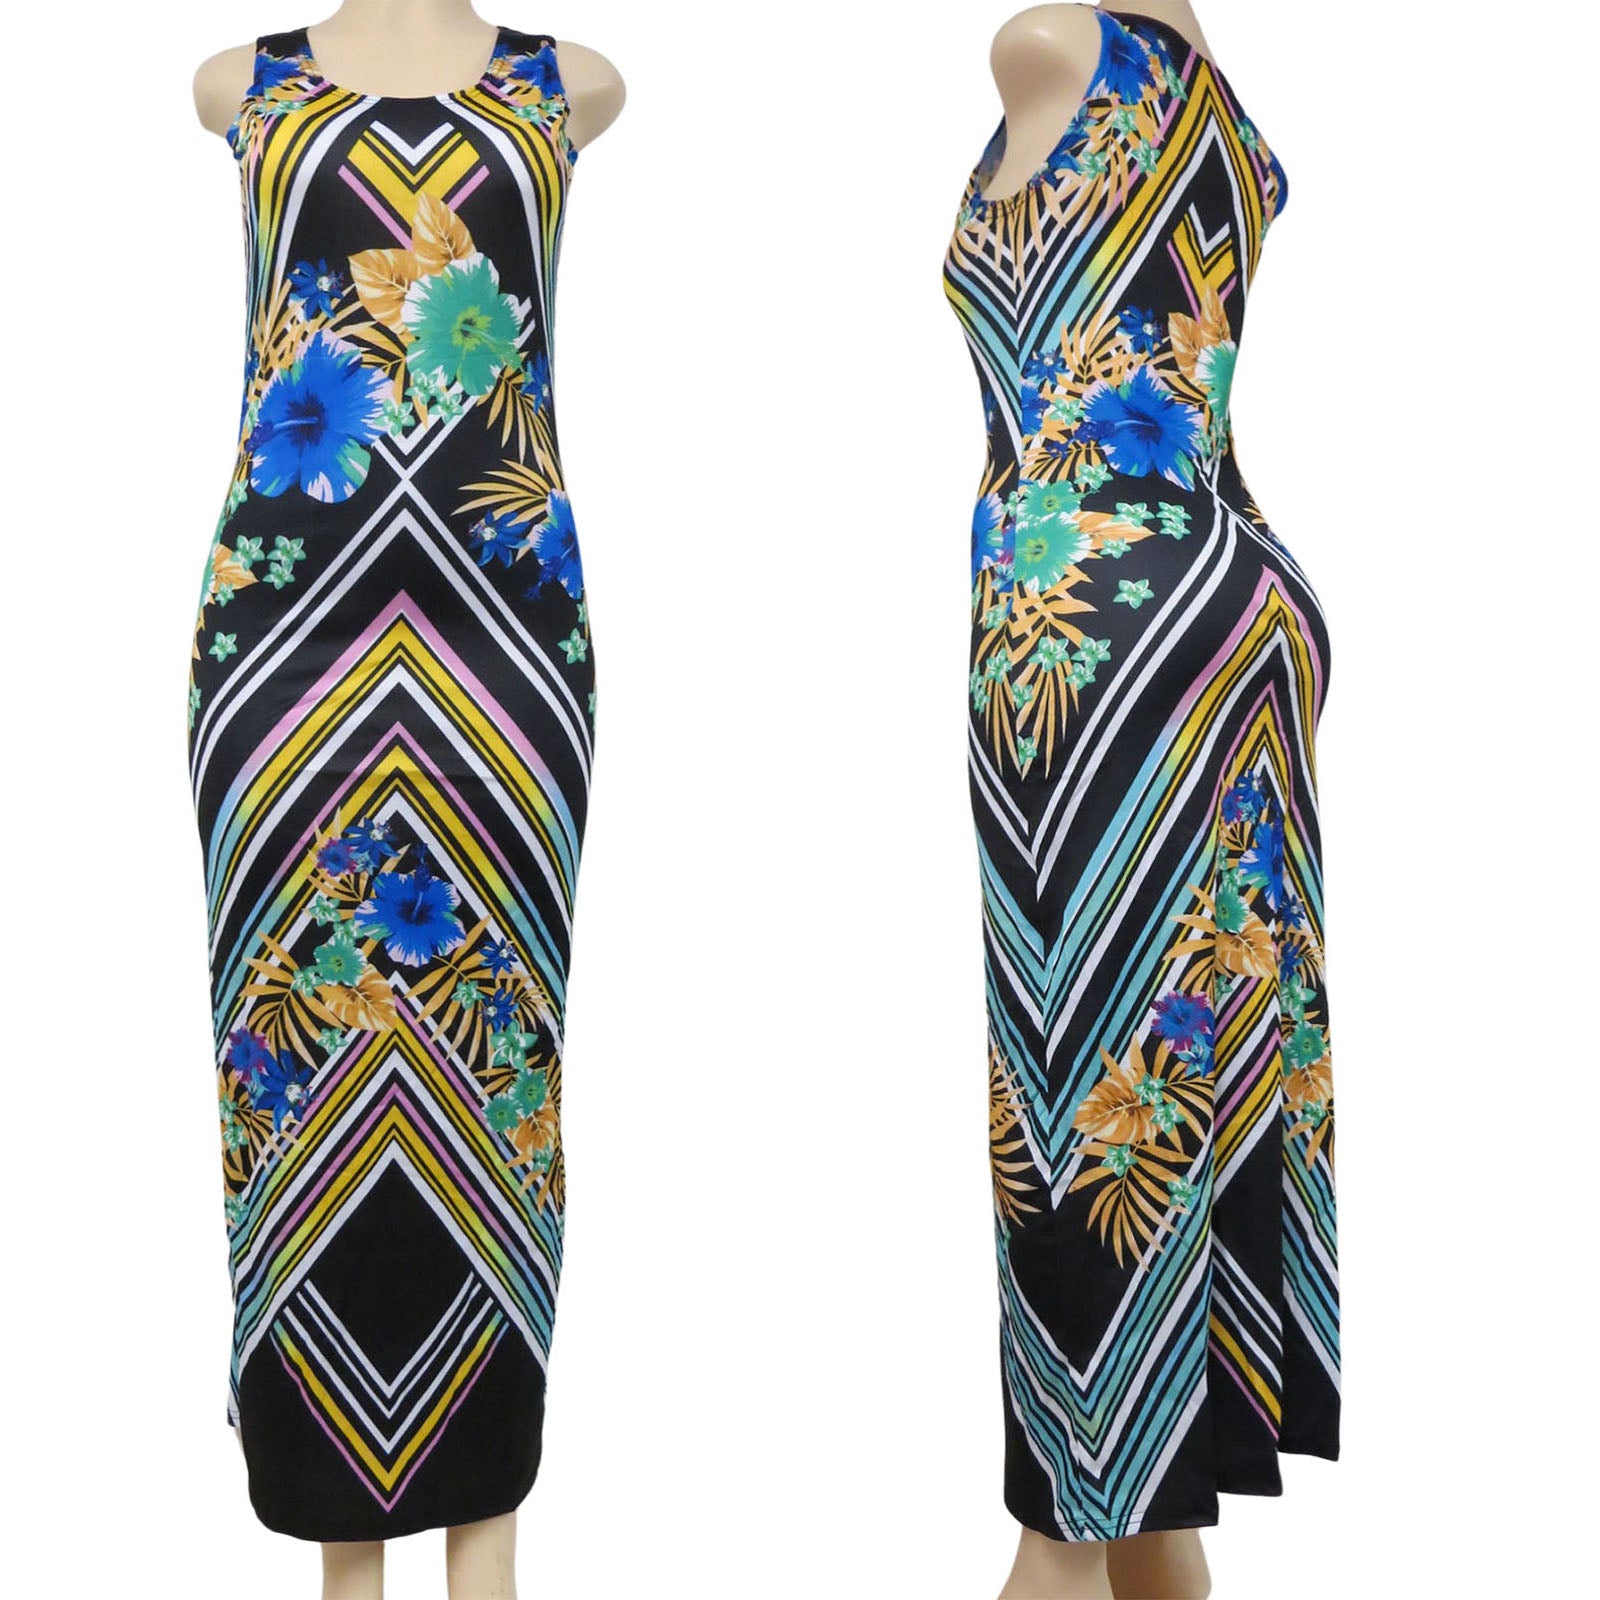 wholesale long sleeveless dress for women in an abstract pattern with black blue yellow and green